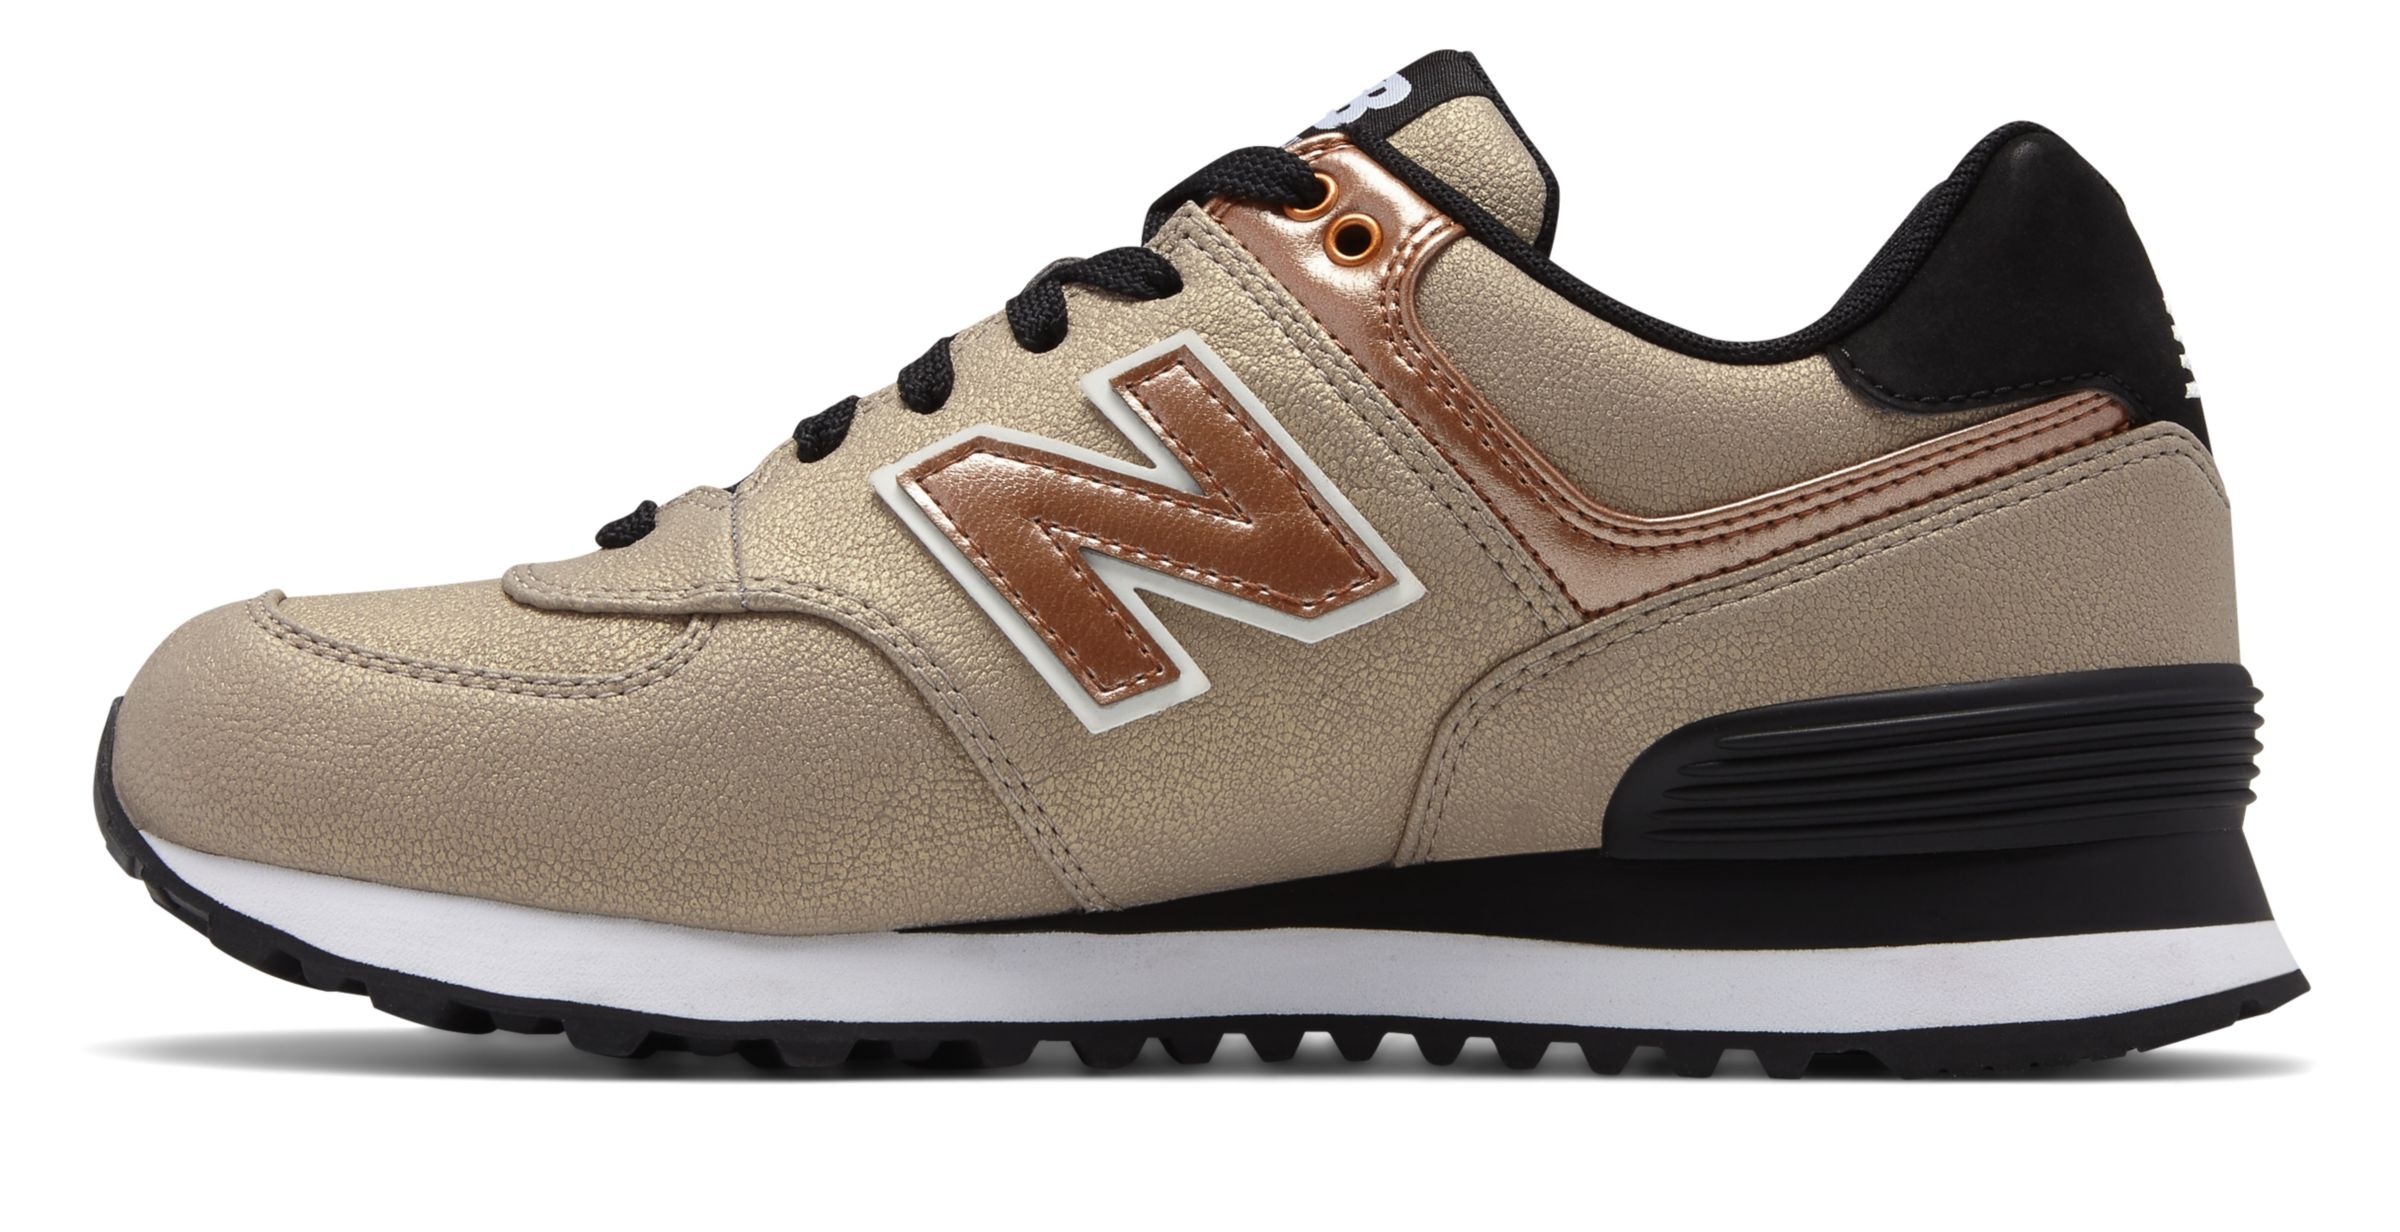 New Balance WL574-SS on Sale - Discounts Up to 20% Off on WL574SFF at Joe's New  Balance Outlet